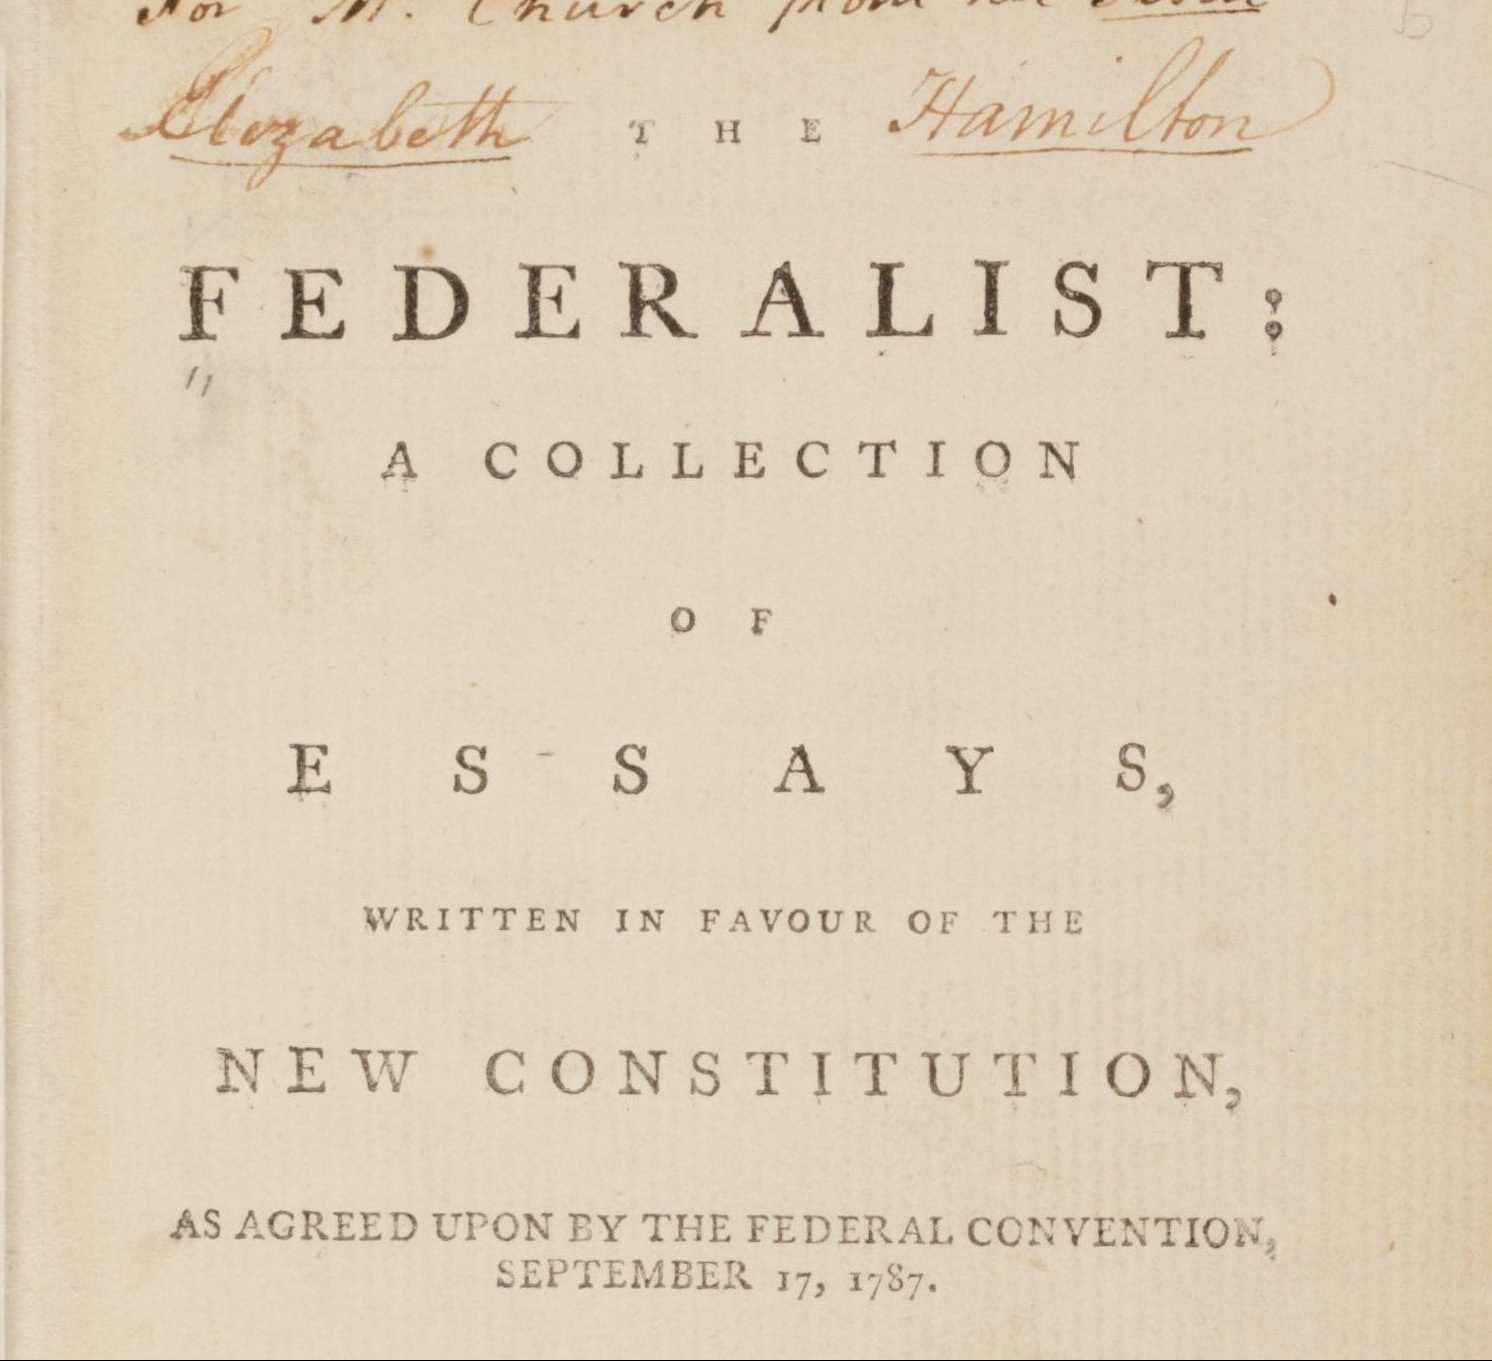 National Civics Day Celebrates The Federalist Papers